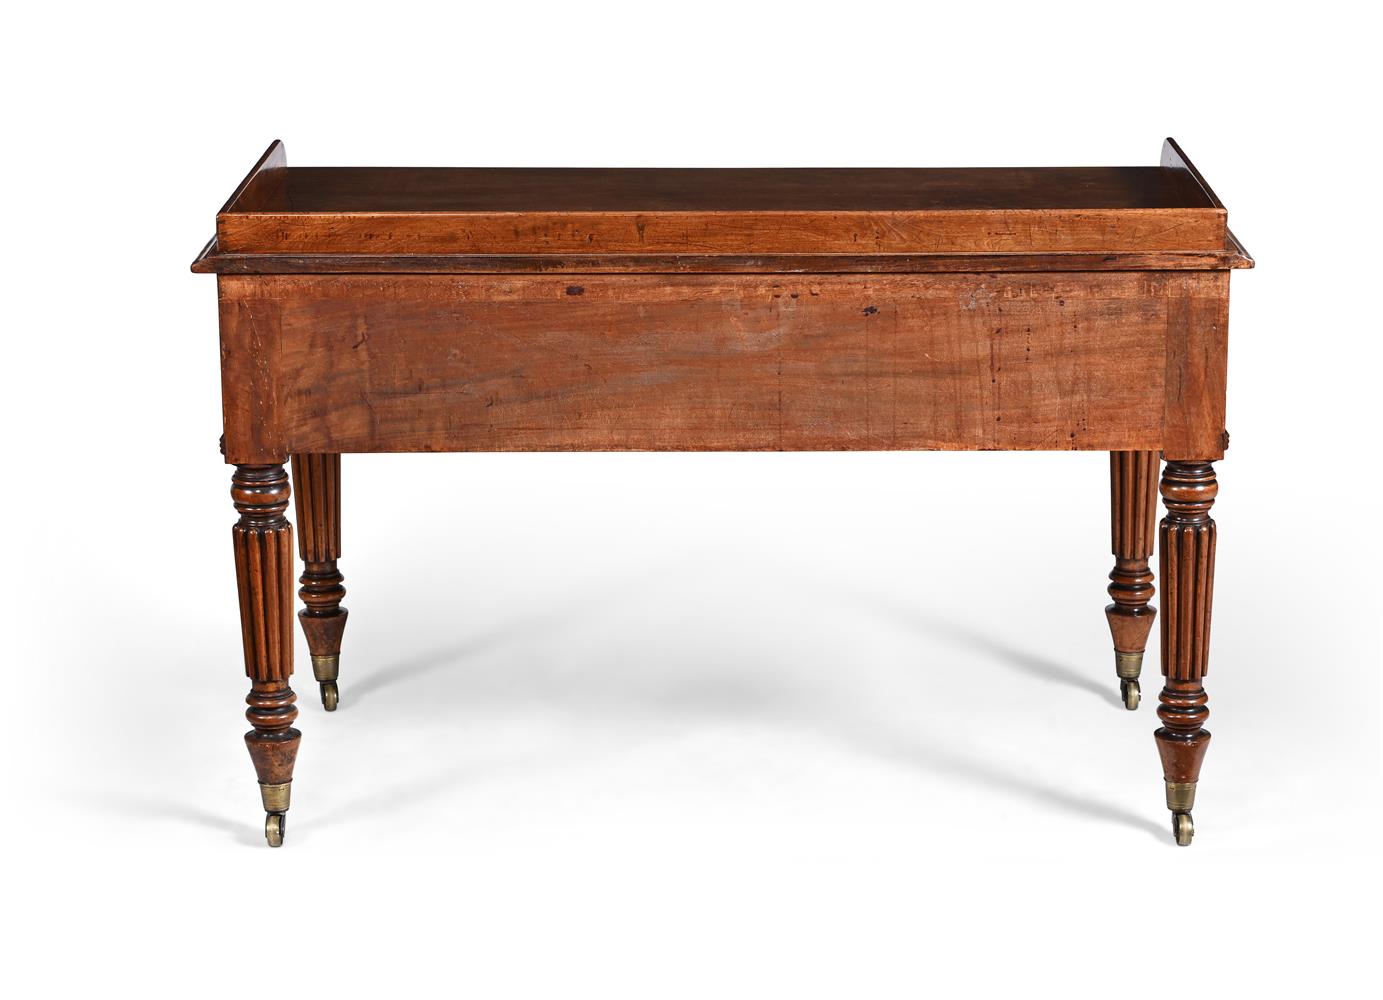 A REGENCY MAHOGANY DRESSING TABLE, ATTRIBUTED TO GILLOWS, CIRCA 1820 - Image 4 of 4